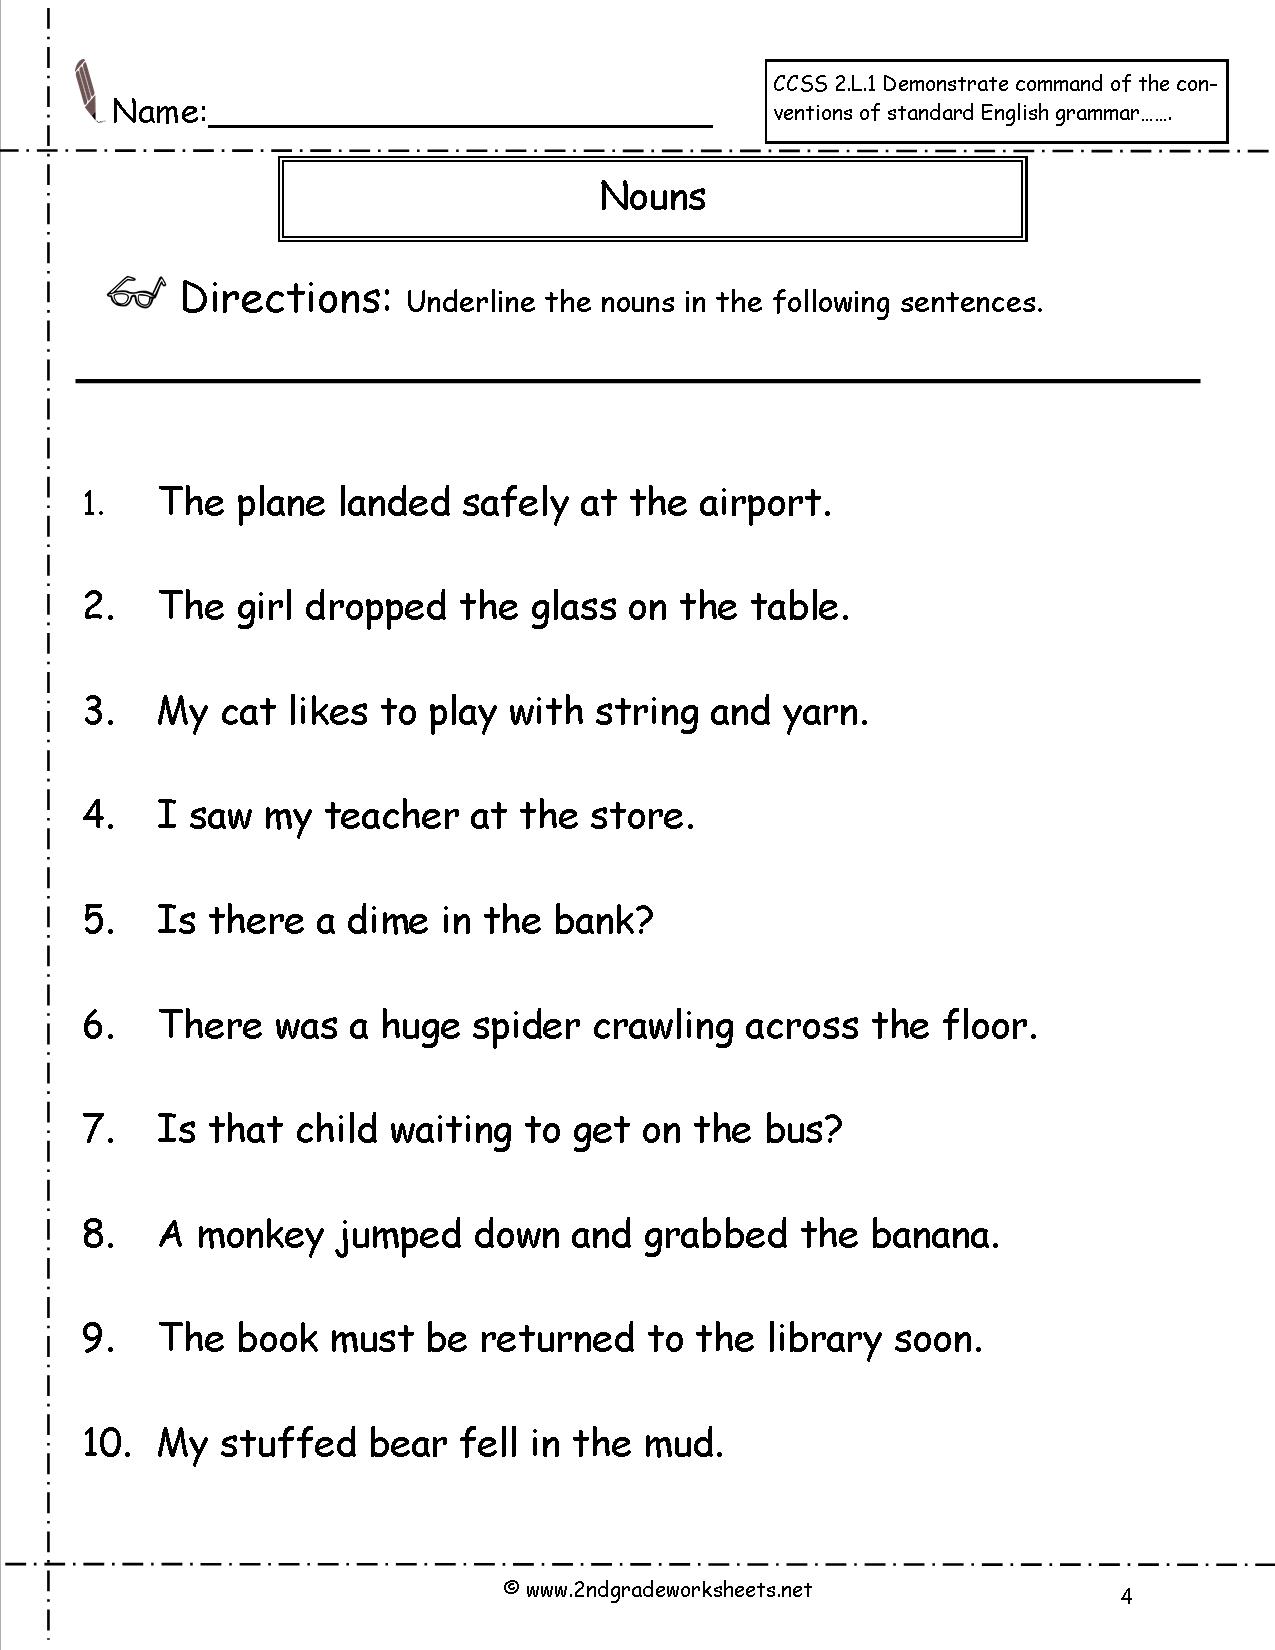 noun-and-verb-hats-and-many-other-no-prep-literacy-printables-for-first-grade-nouns